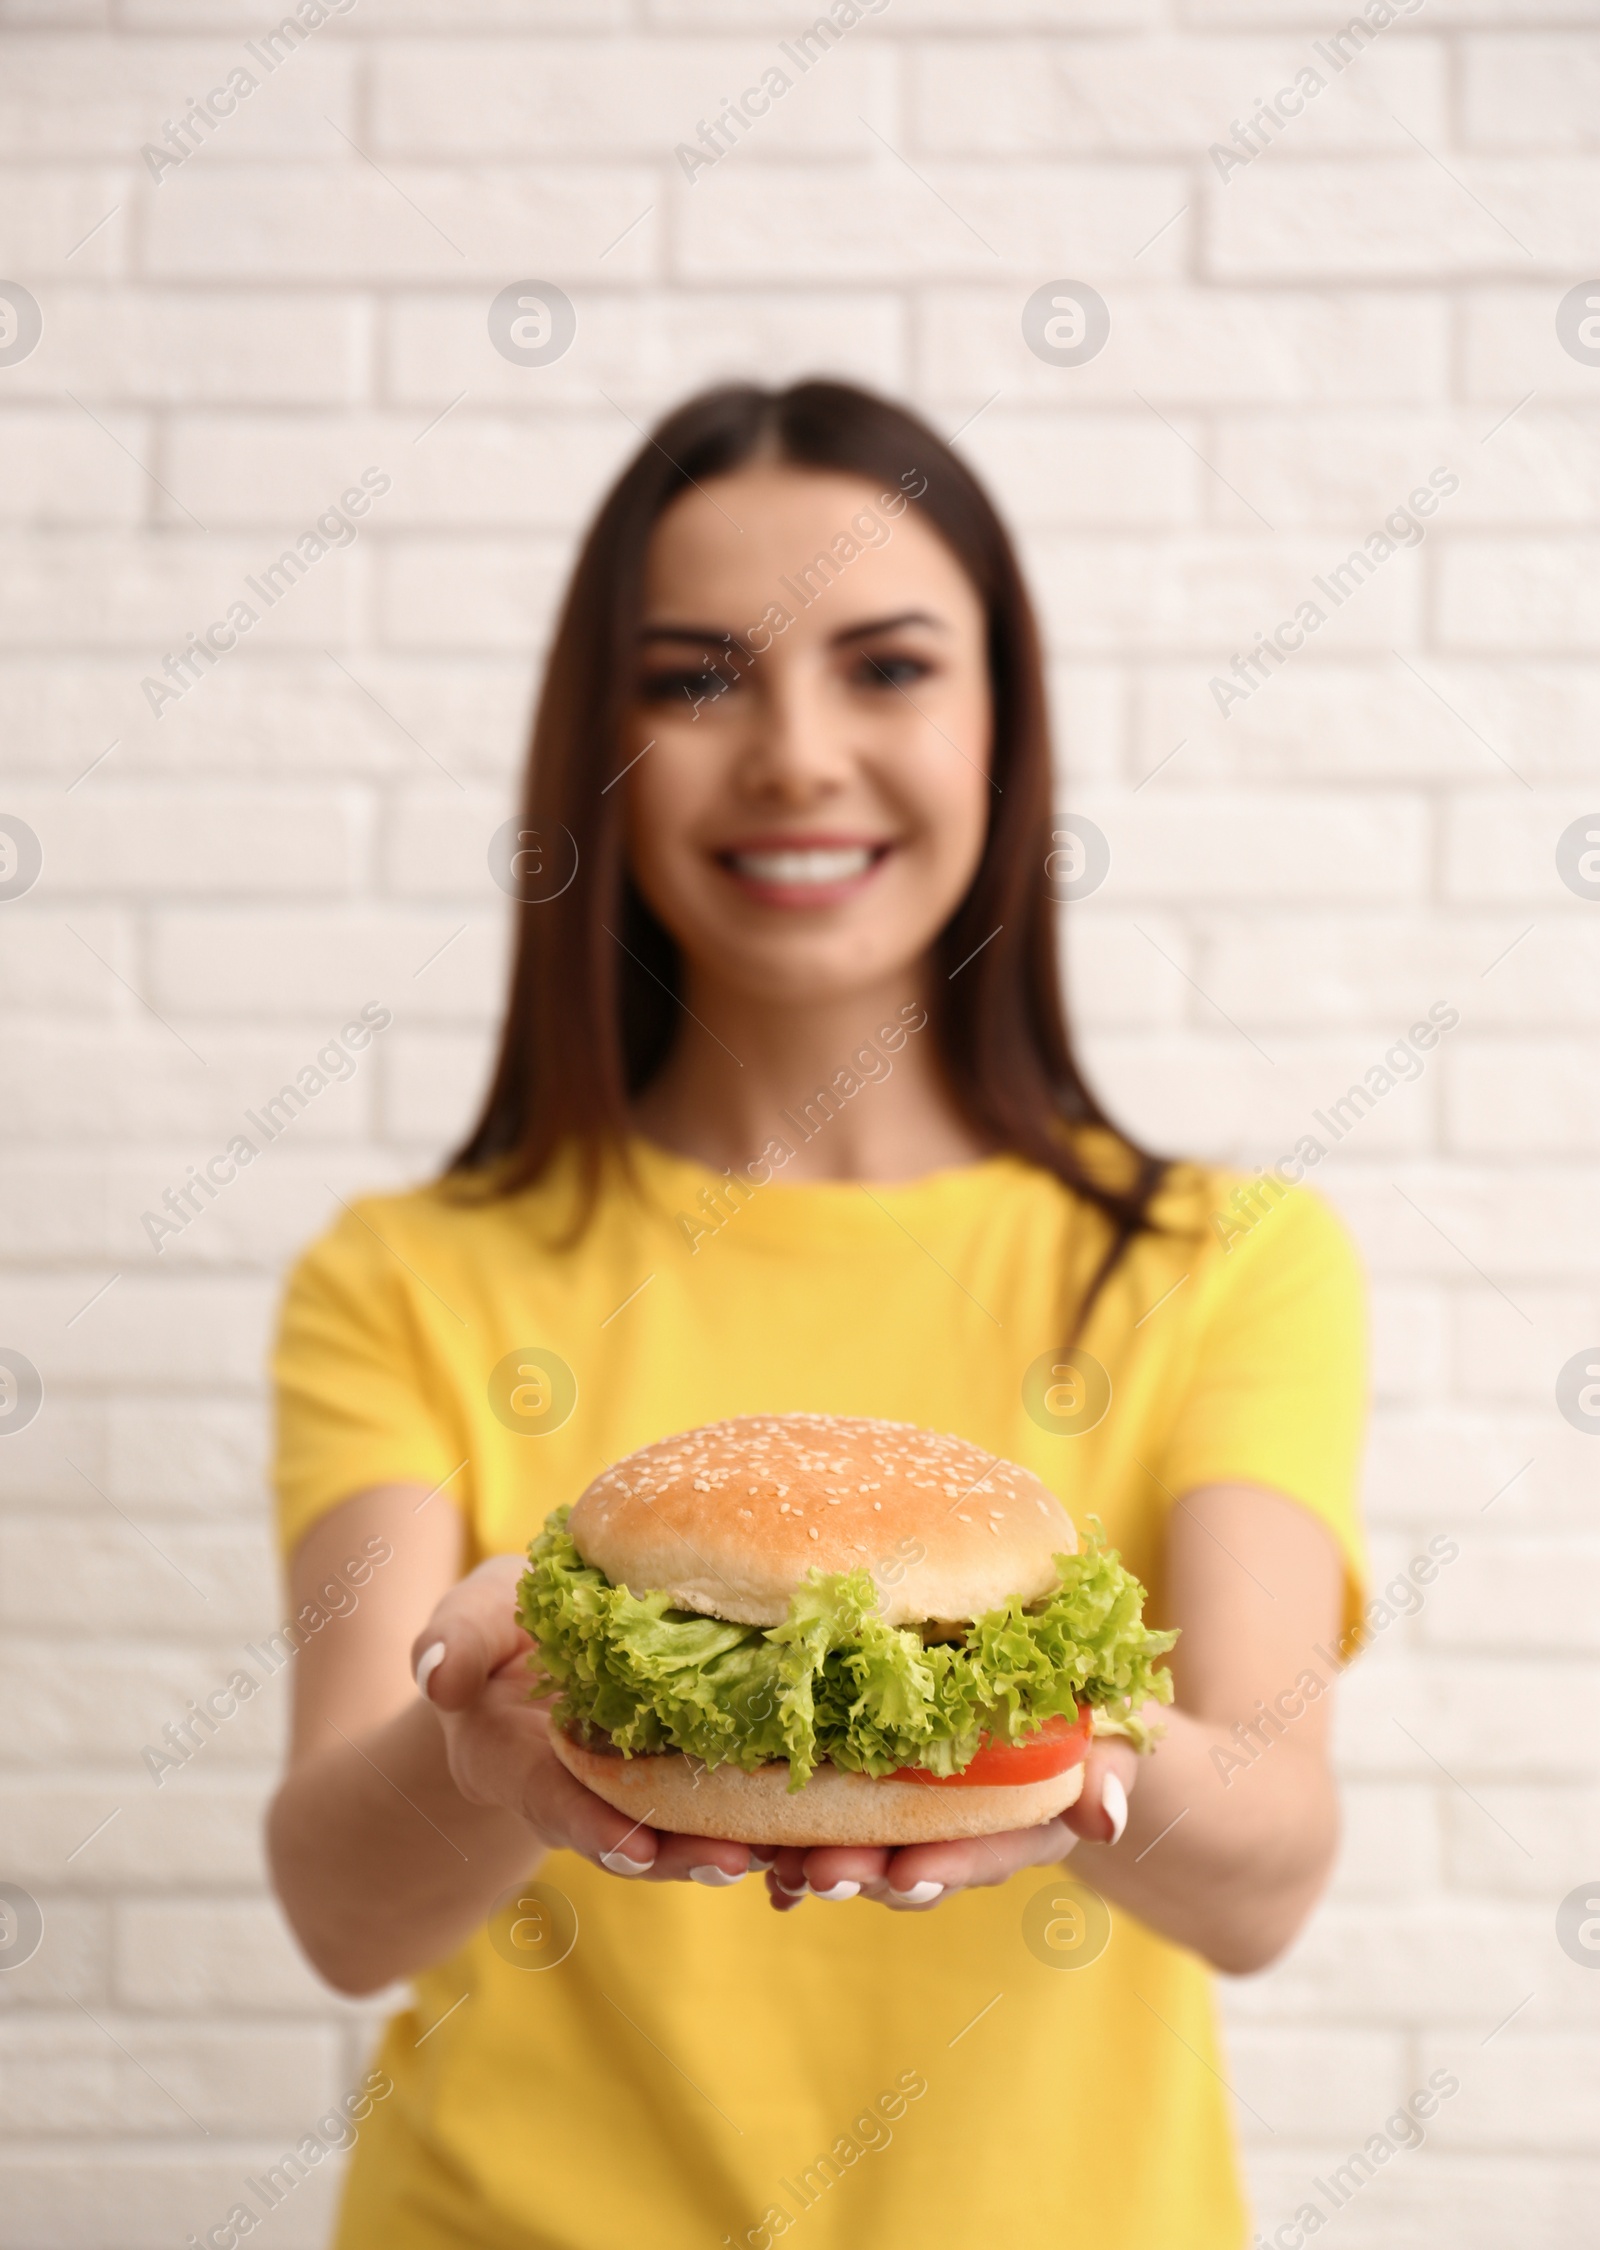 Photo of Young woman with tasty burger near brick wall